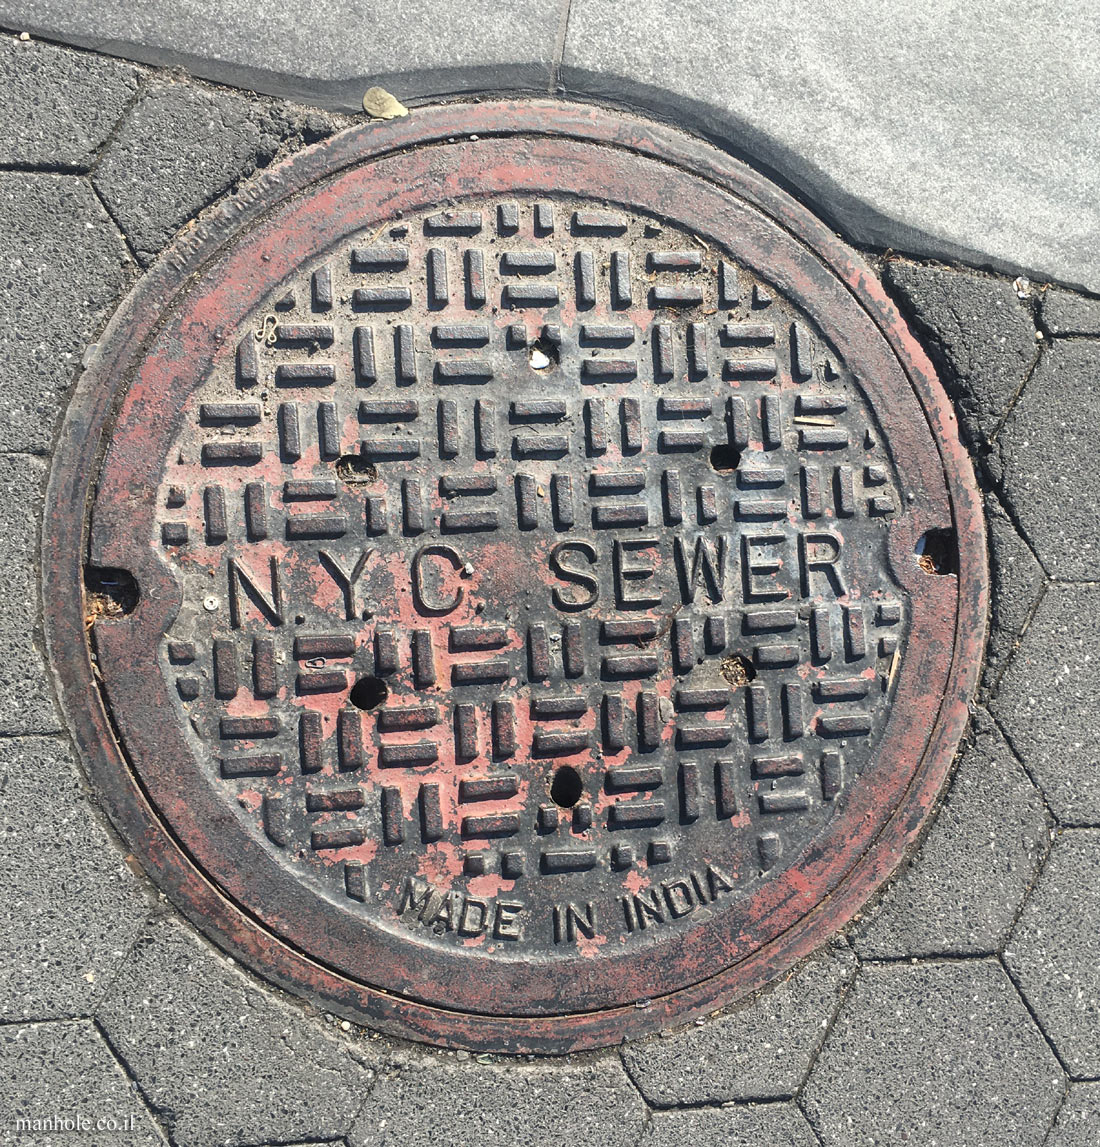 New York - Sewage - Made in India 4